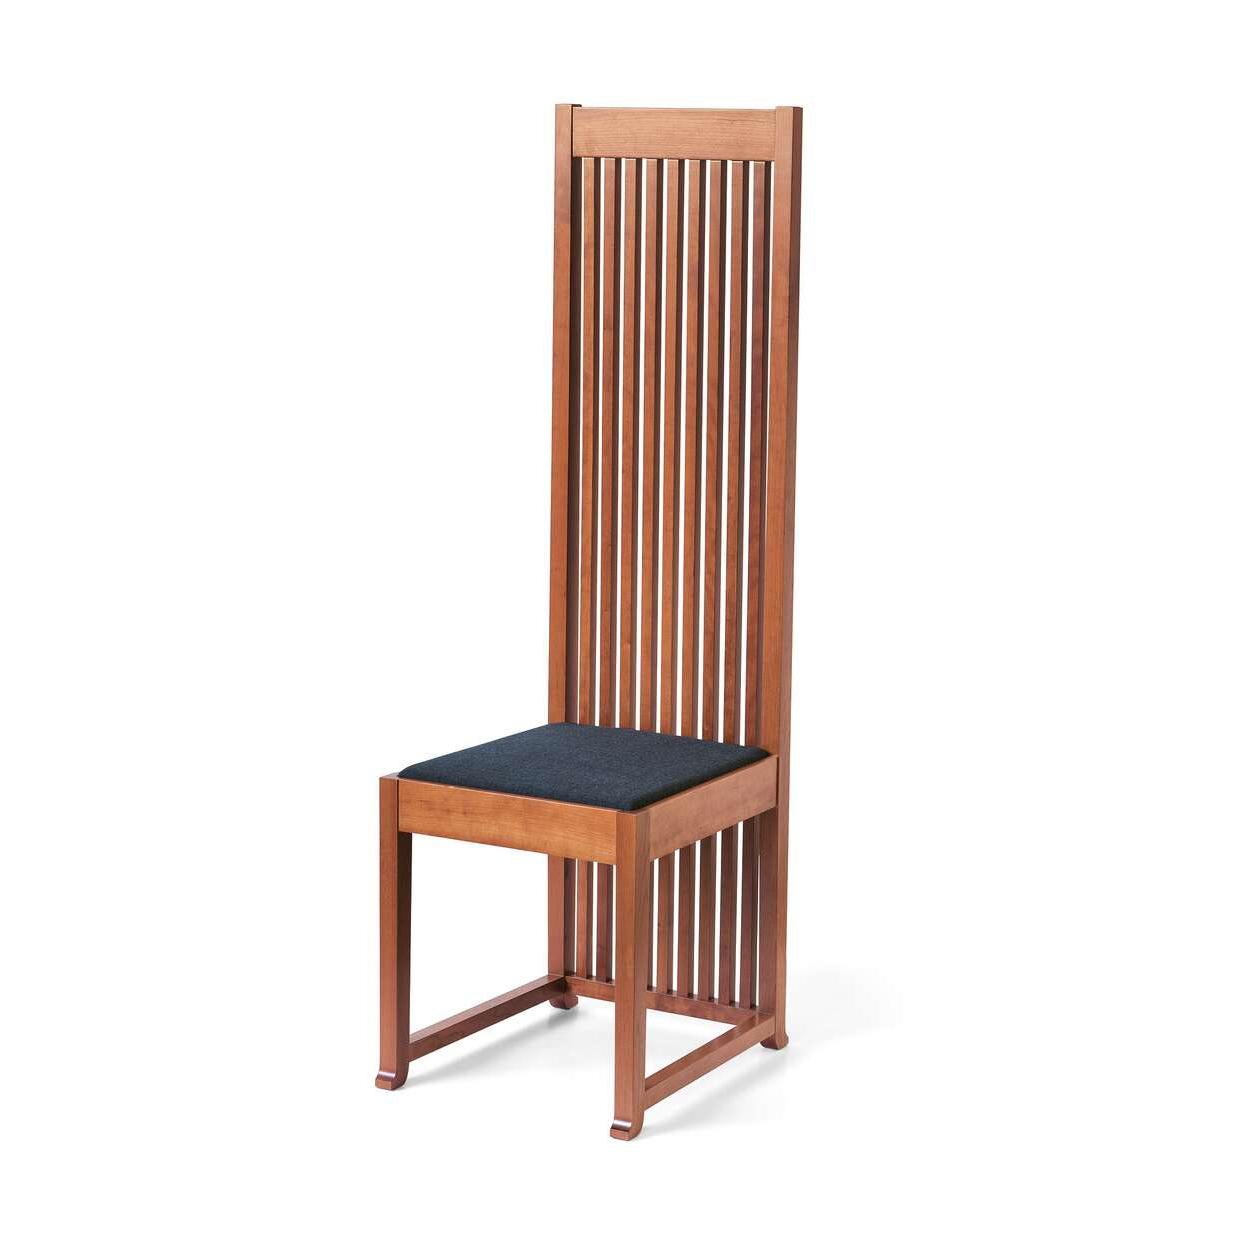 Chair designed by Frank Lloyd Wrigh in 1908, relaunched in 1986.

Manufactured by Cassina in Italy.

The rigorous design of this chair is a perfect exemplar of Frank Lloyd Wright’s design ethos. This can be seen in the tall backs and the strong